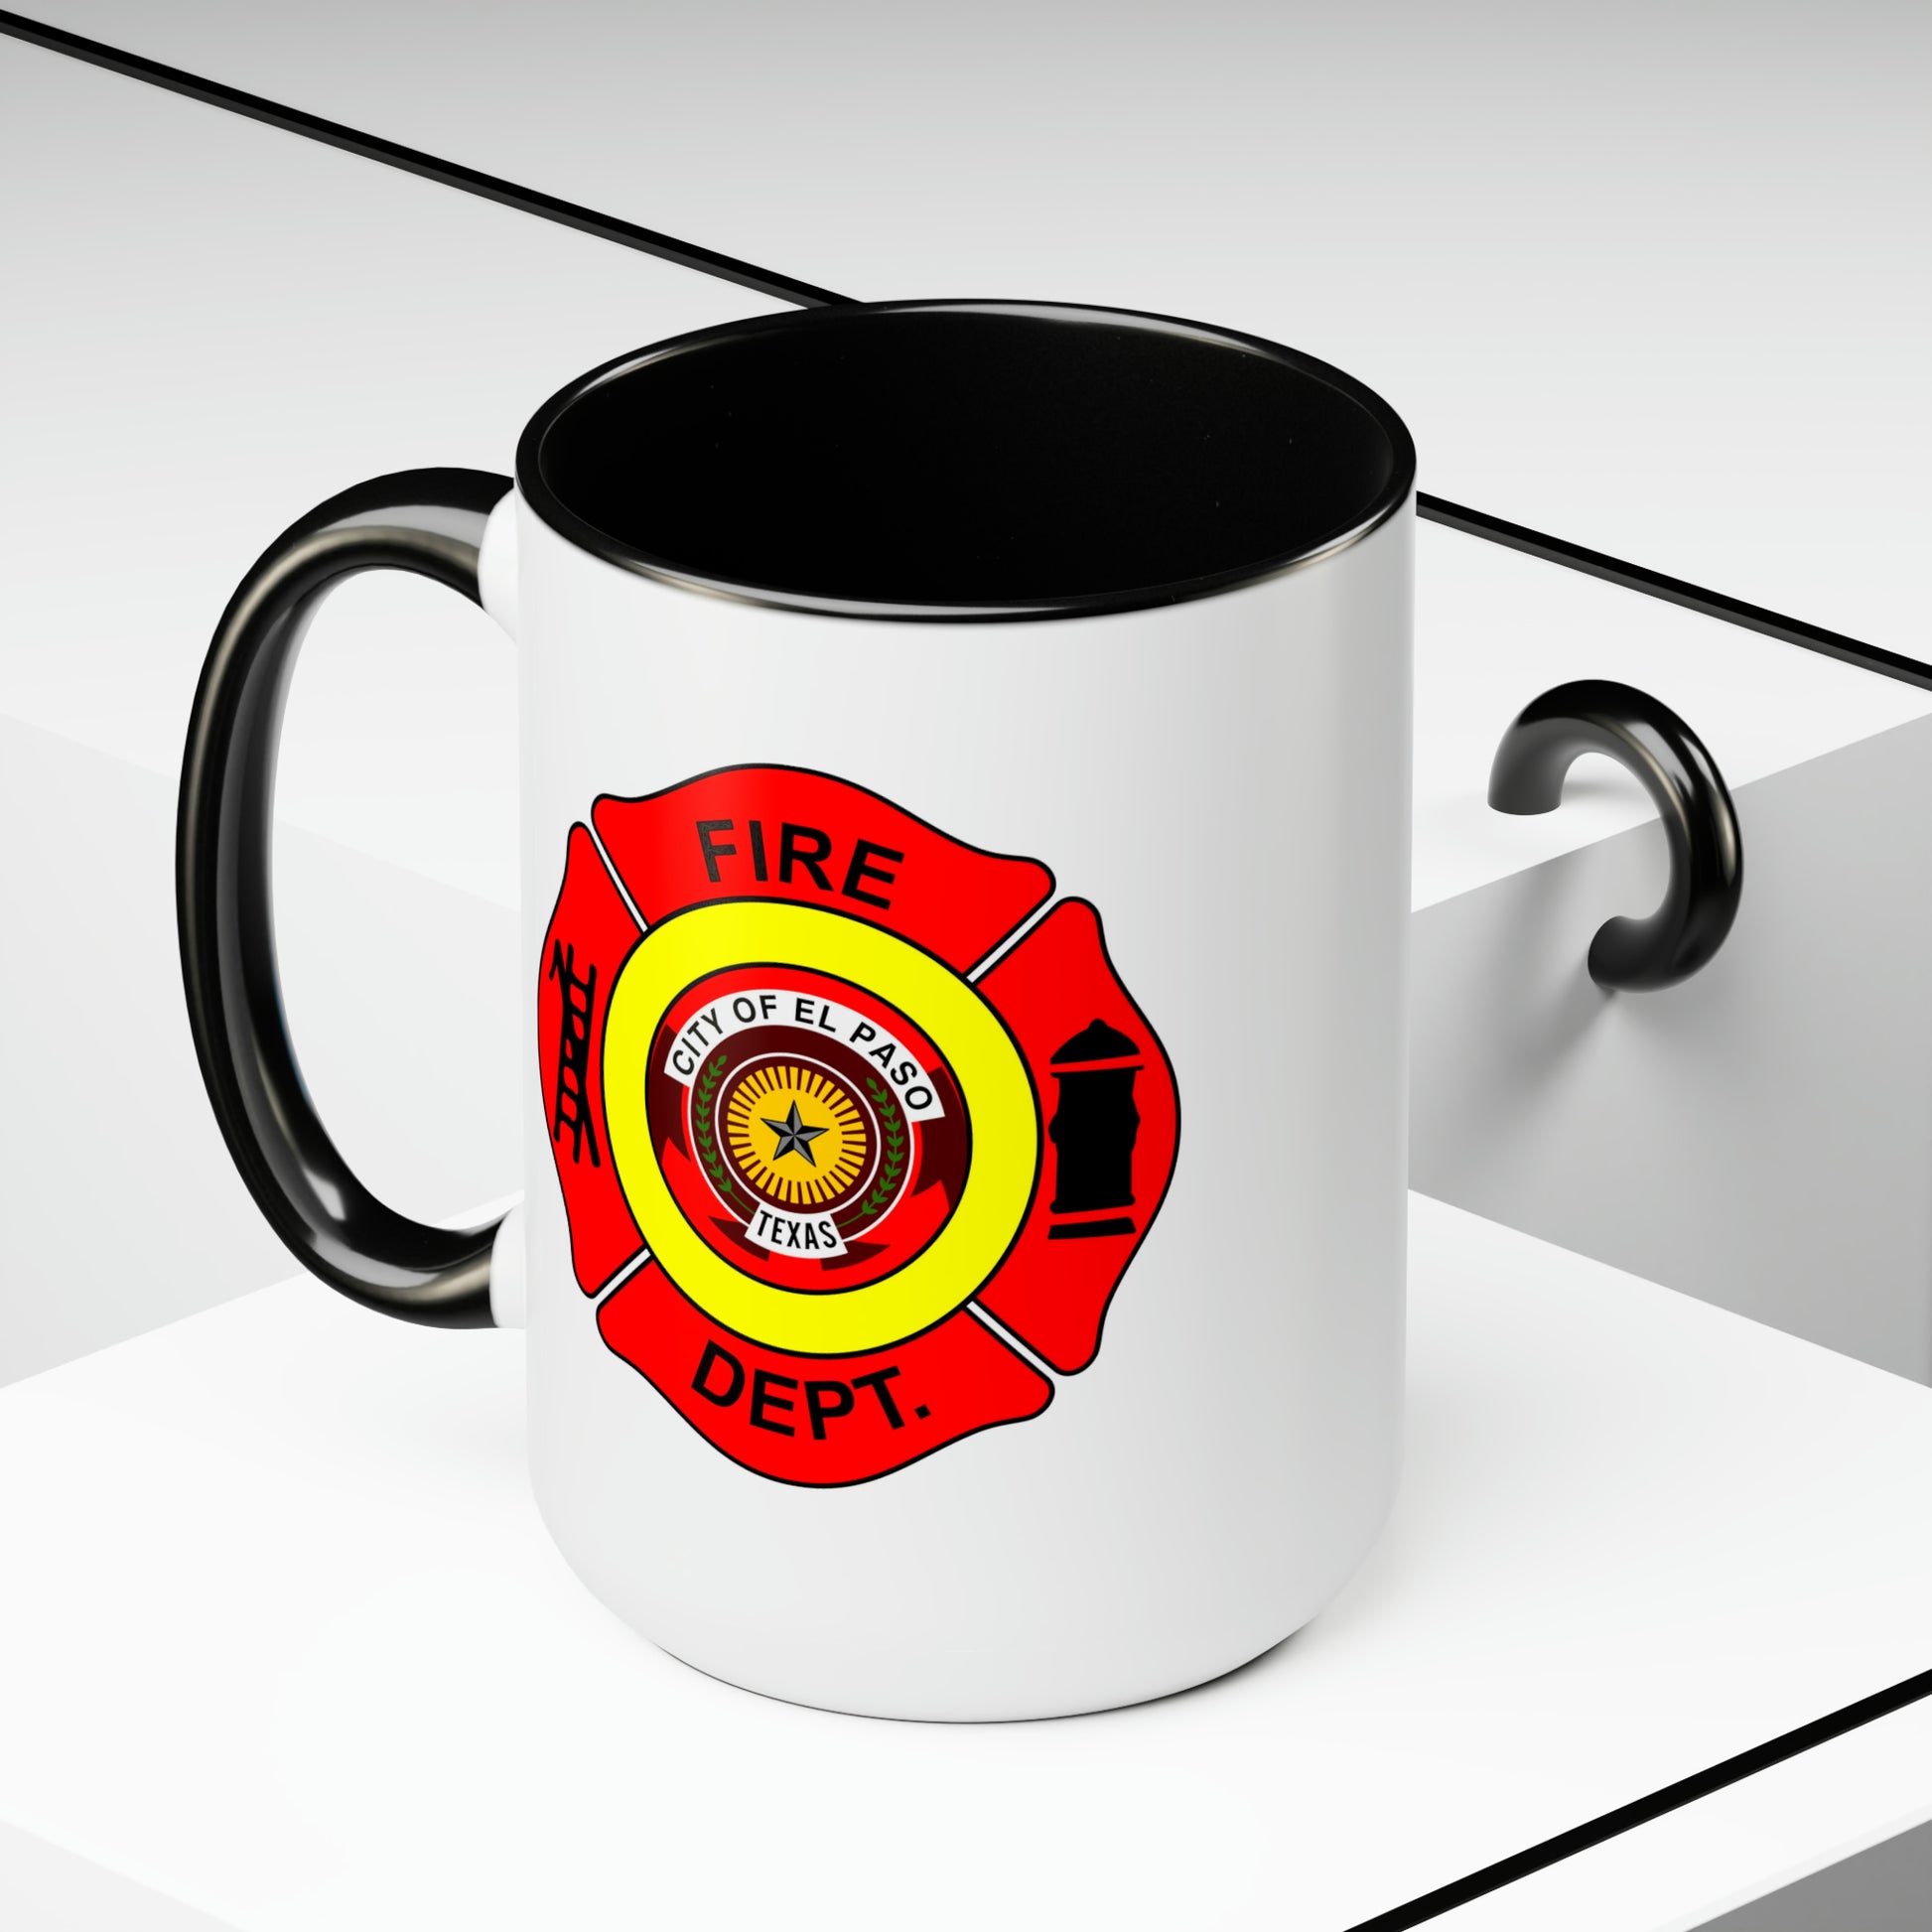 El Paso Fire Department Coffee Mug - Double Sided Black Accent White Ceramic 15oz by TheGlassyLass